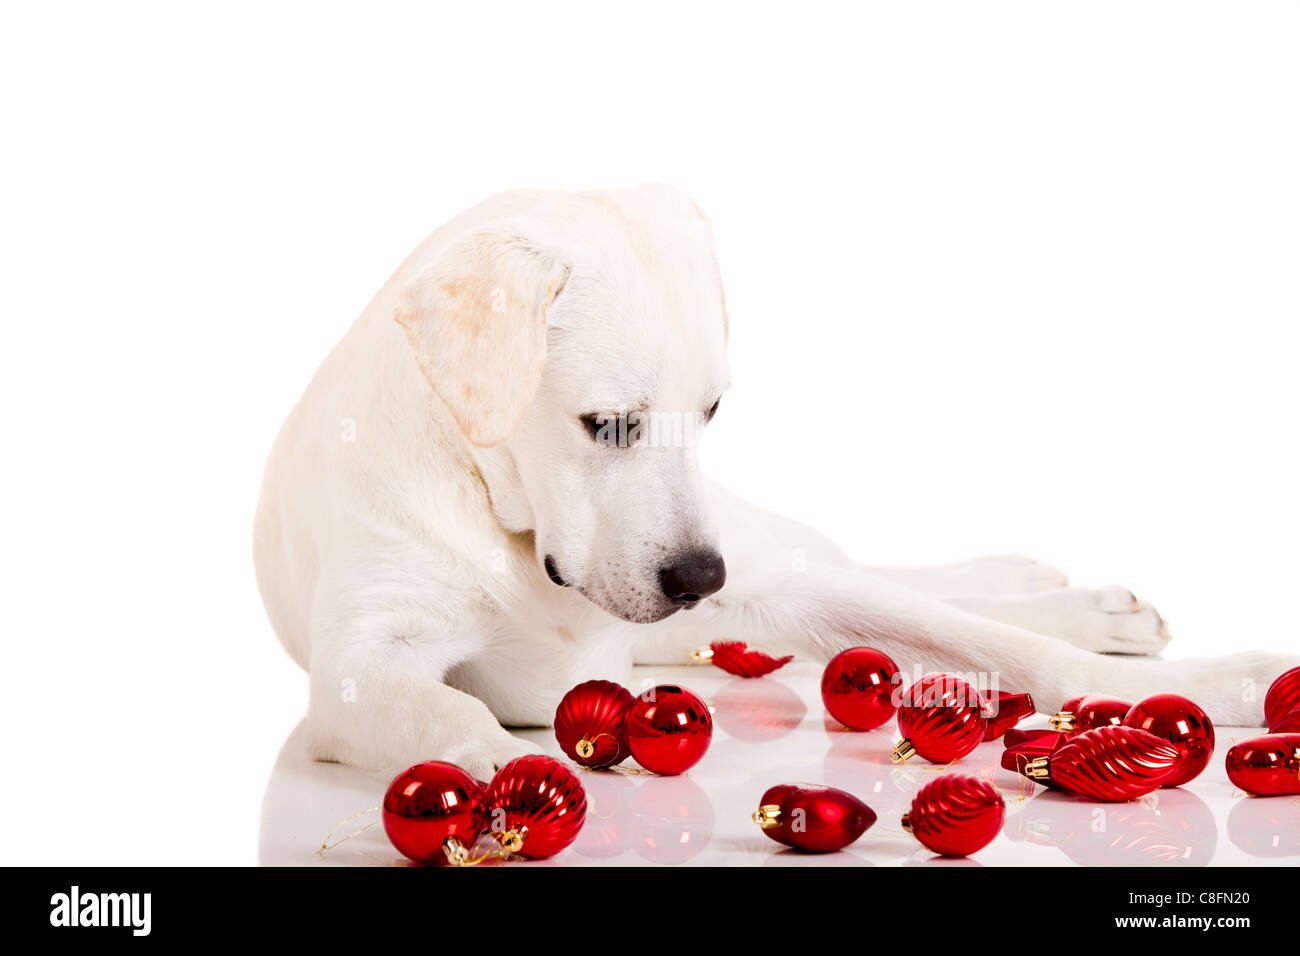 Beautiful Labrador retriever surrounded by Christmas balls, isolated on white background Stock Photo